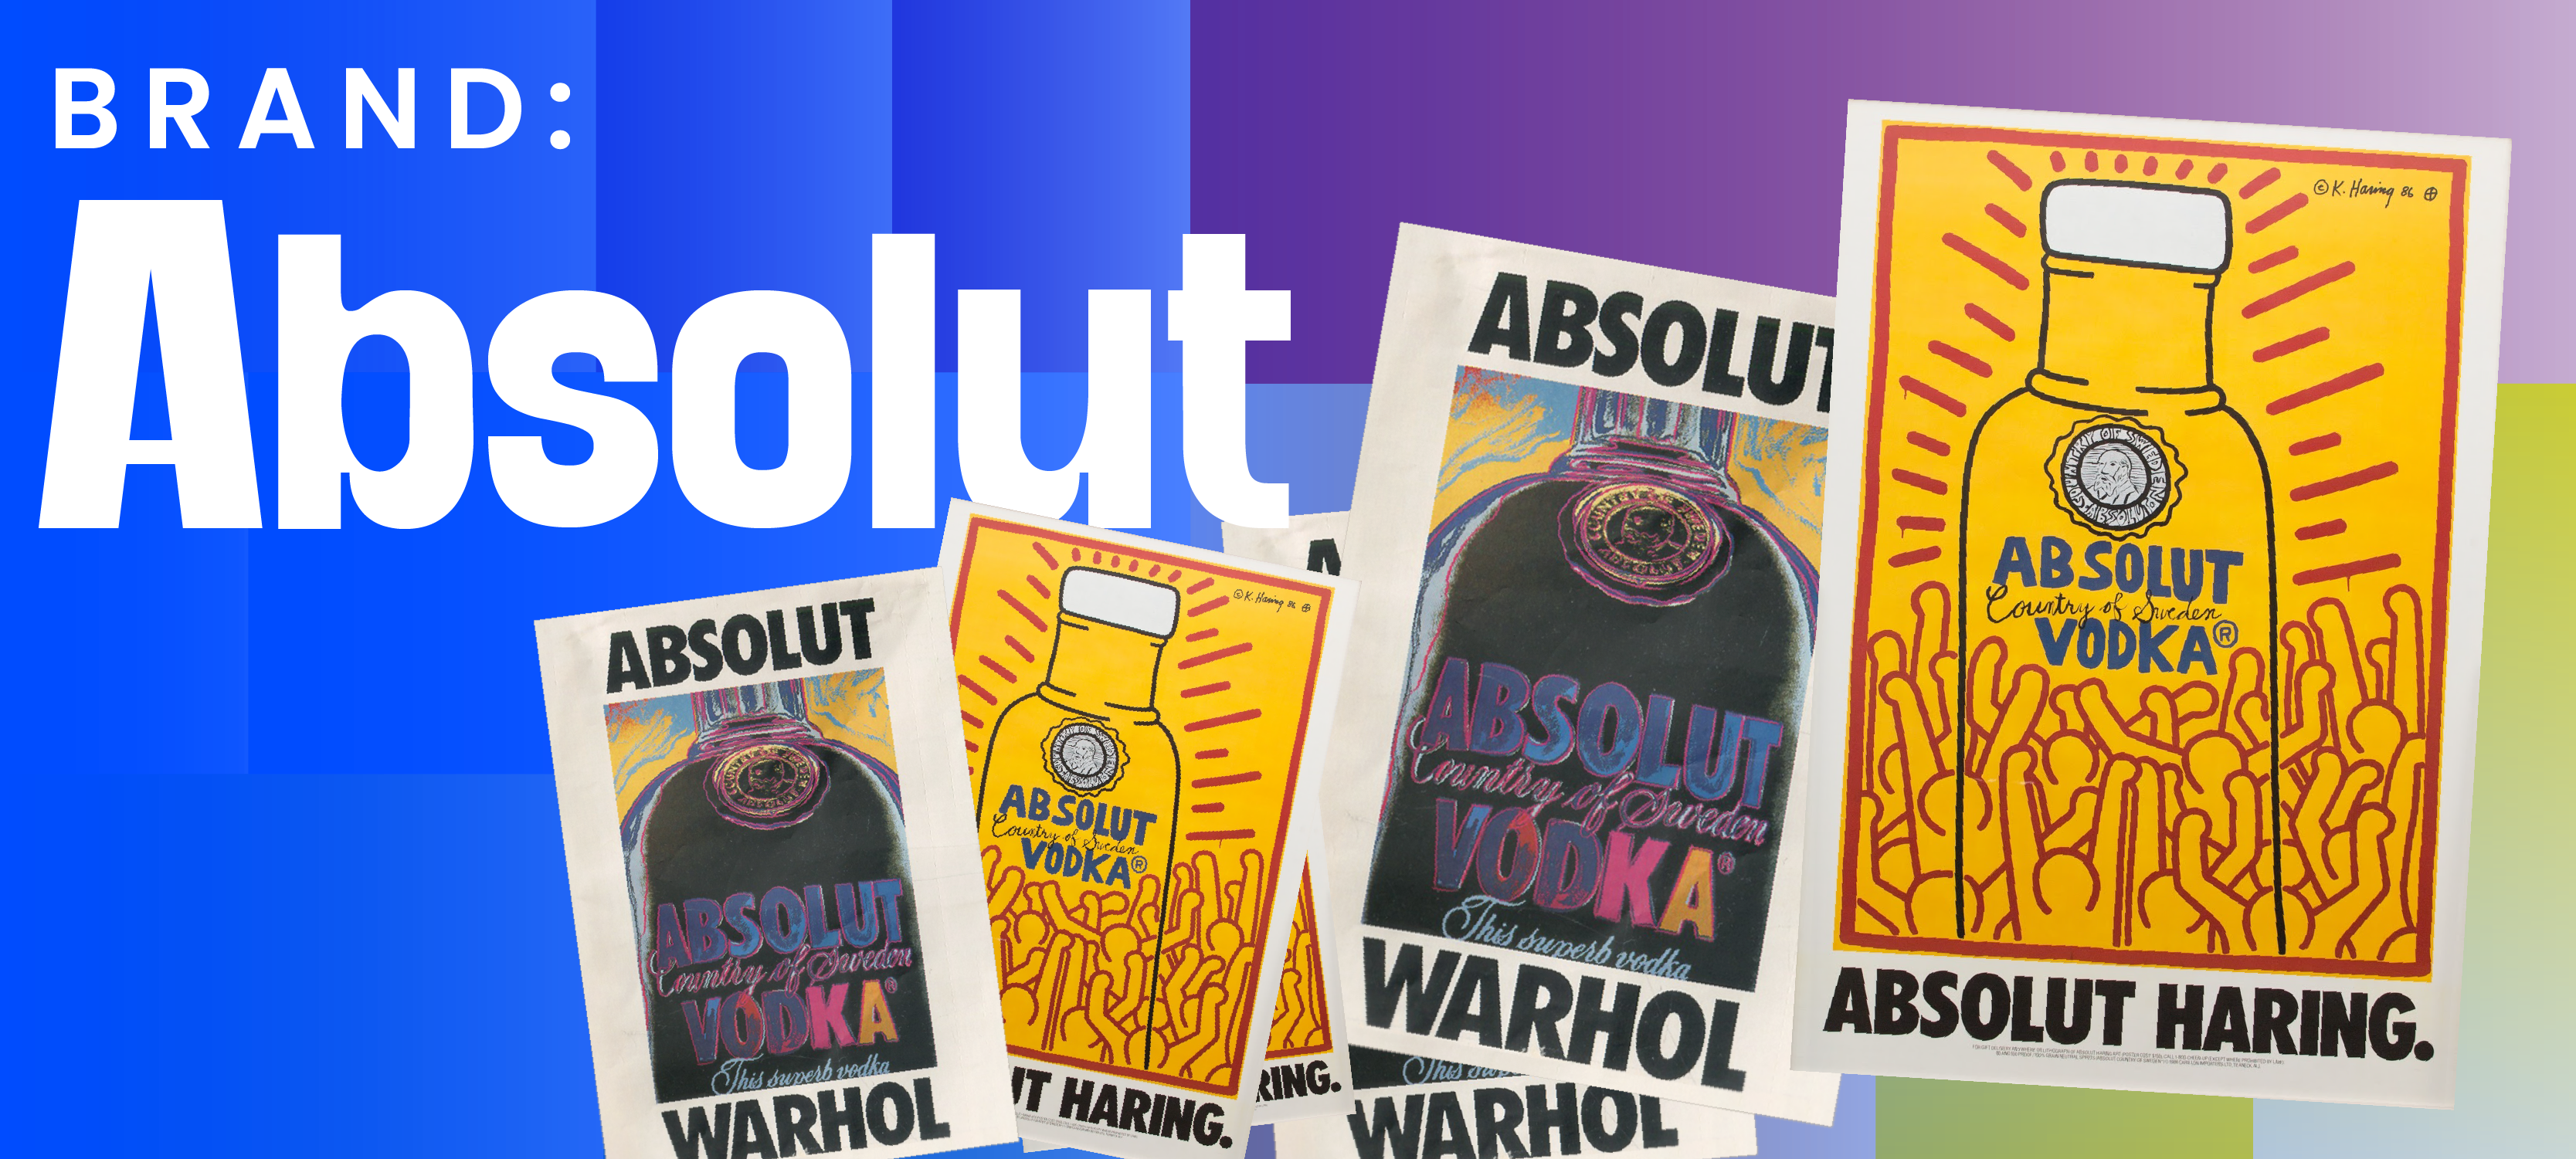 LGBT History month campaign 1 Absolut blog